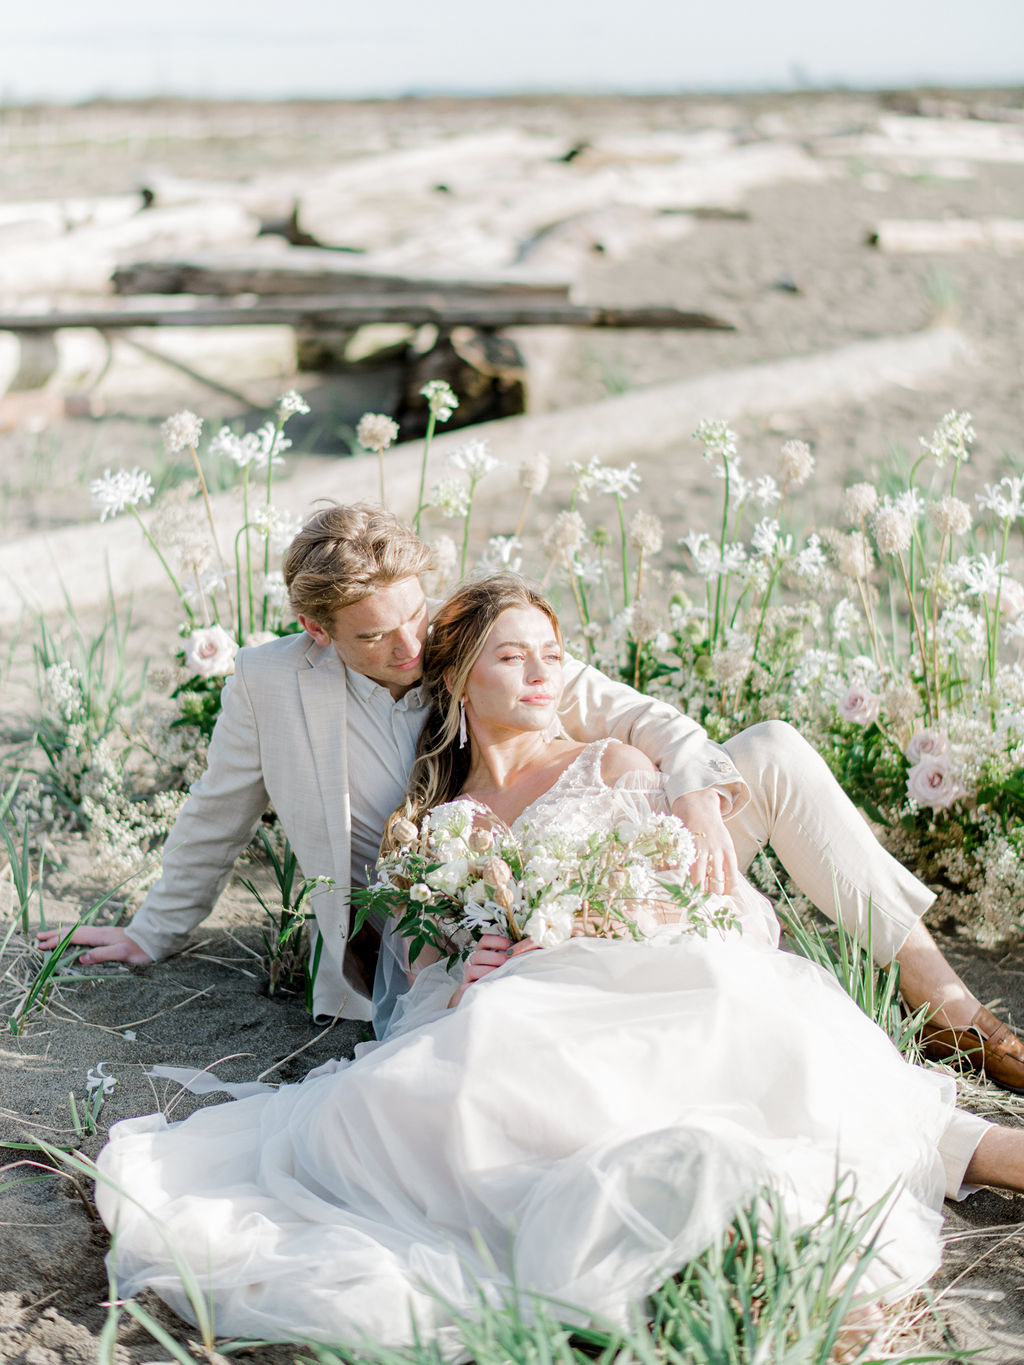 Romantic beach wedding ceremony in Vancouver, British Columbia; Fine art wedding inspiration for an intimate beach wedding, romantic wedding portraits in front of a grounded floral arch with organic greenery and blush and sand coloured florals in front of the ocean